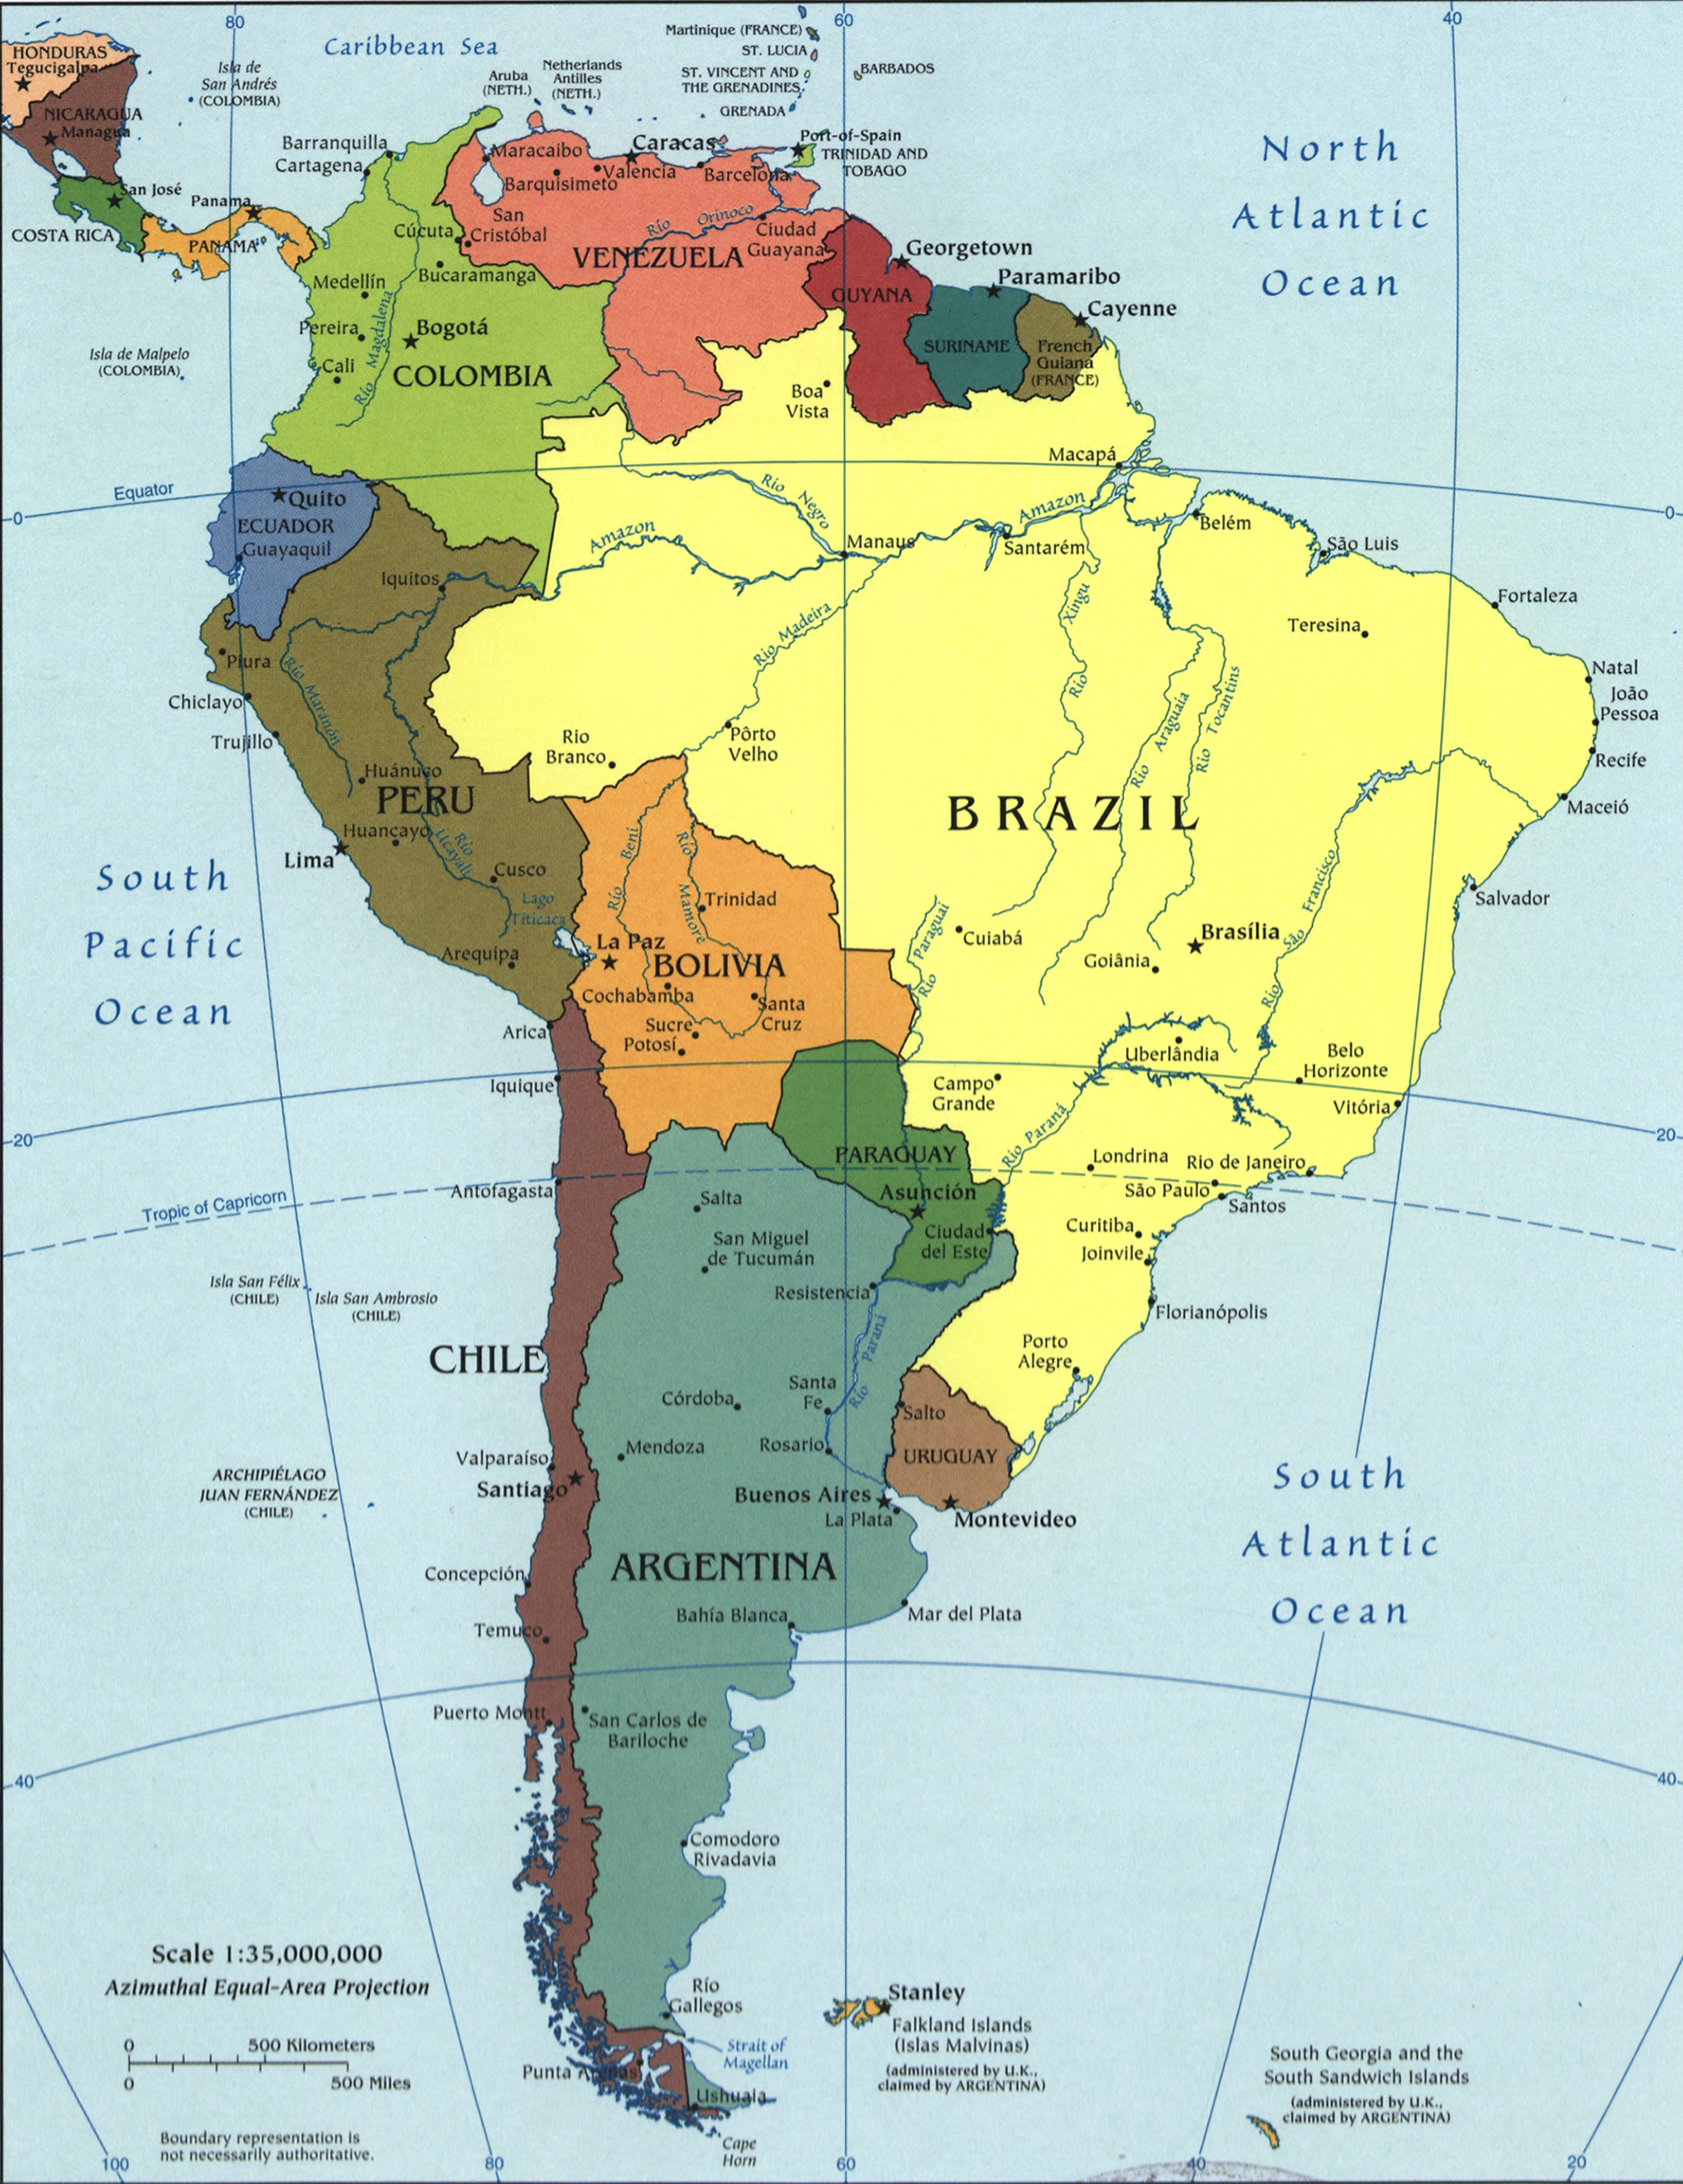 The USA and Latin America: A History of Meddling?